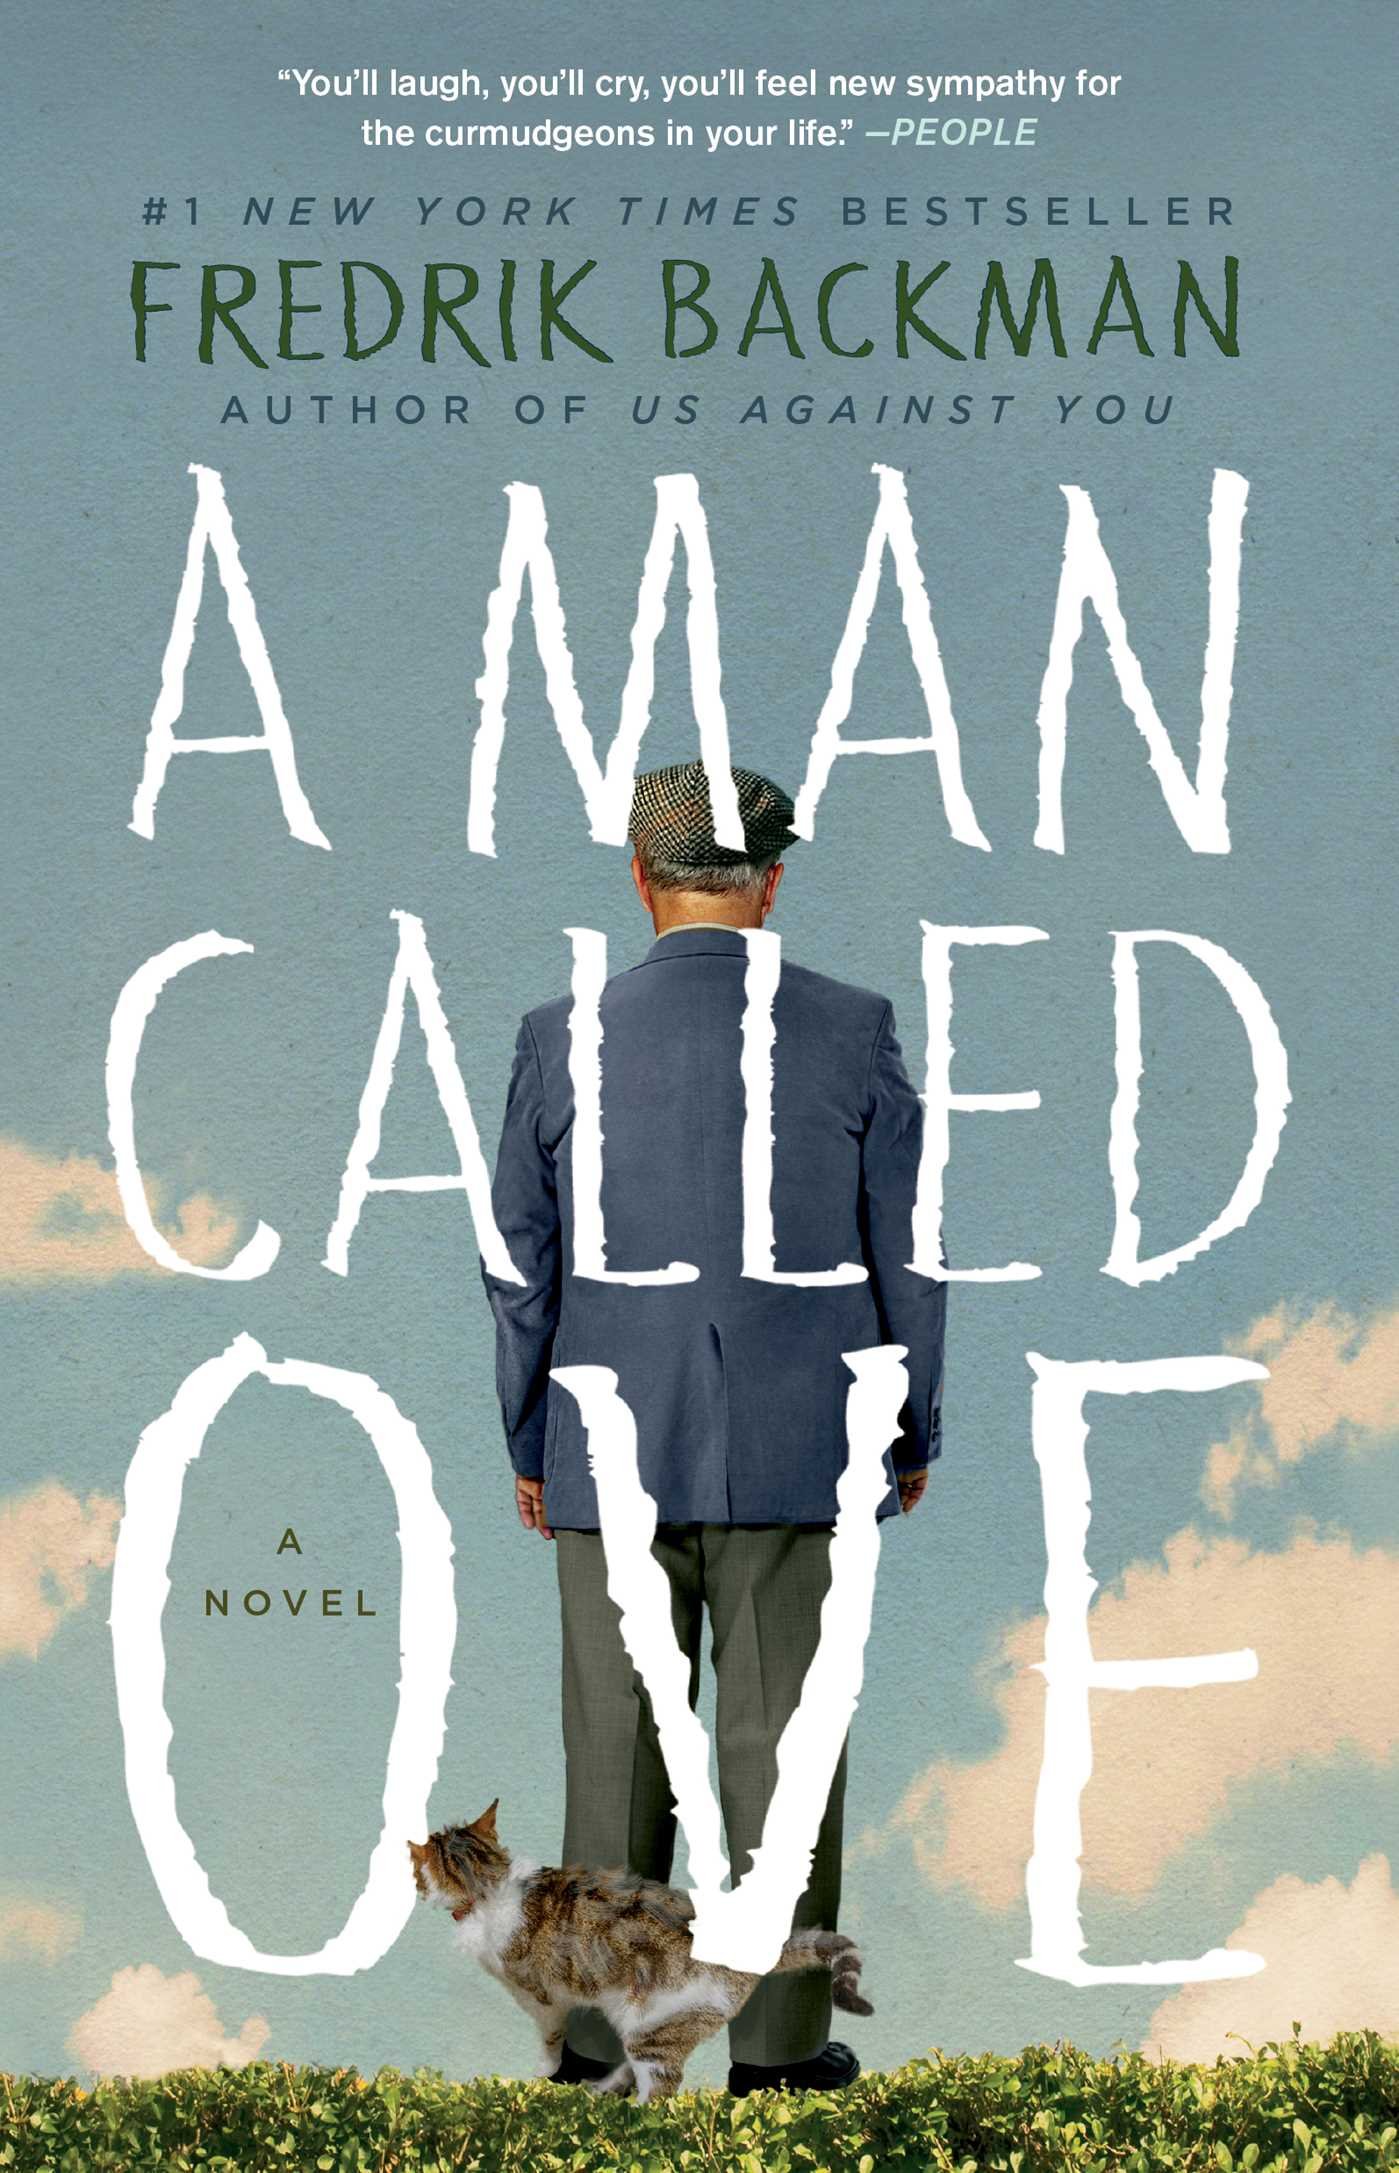 A Man Called Ove book cover